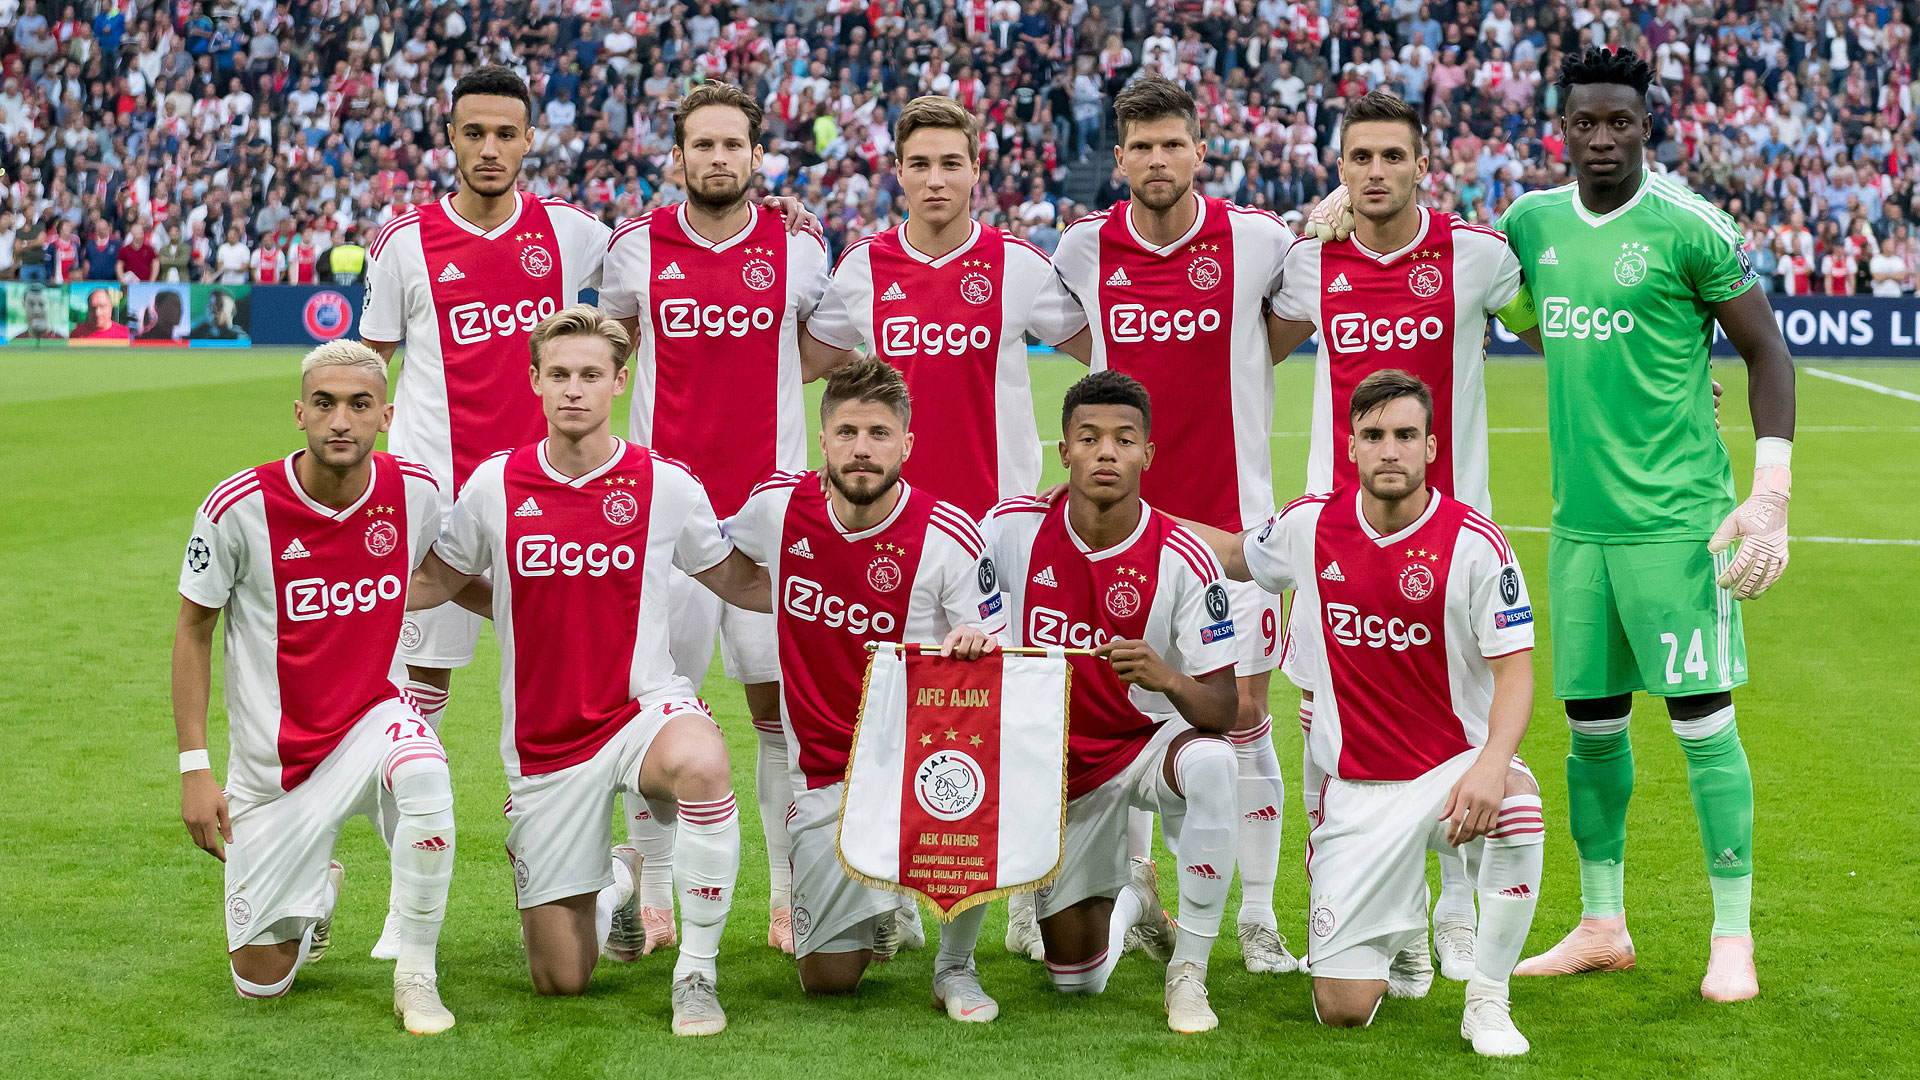 Ajax History, Ownership, Squad Members, Support Staff, and Honors -